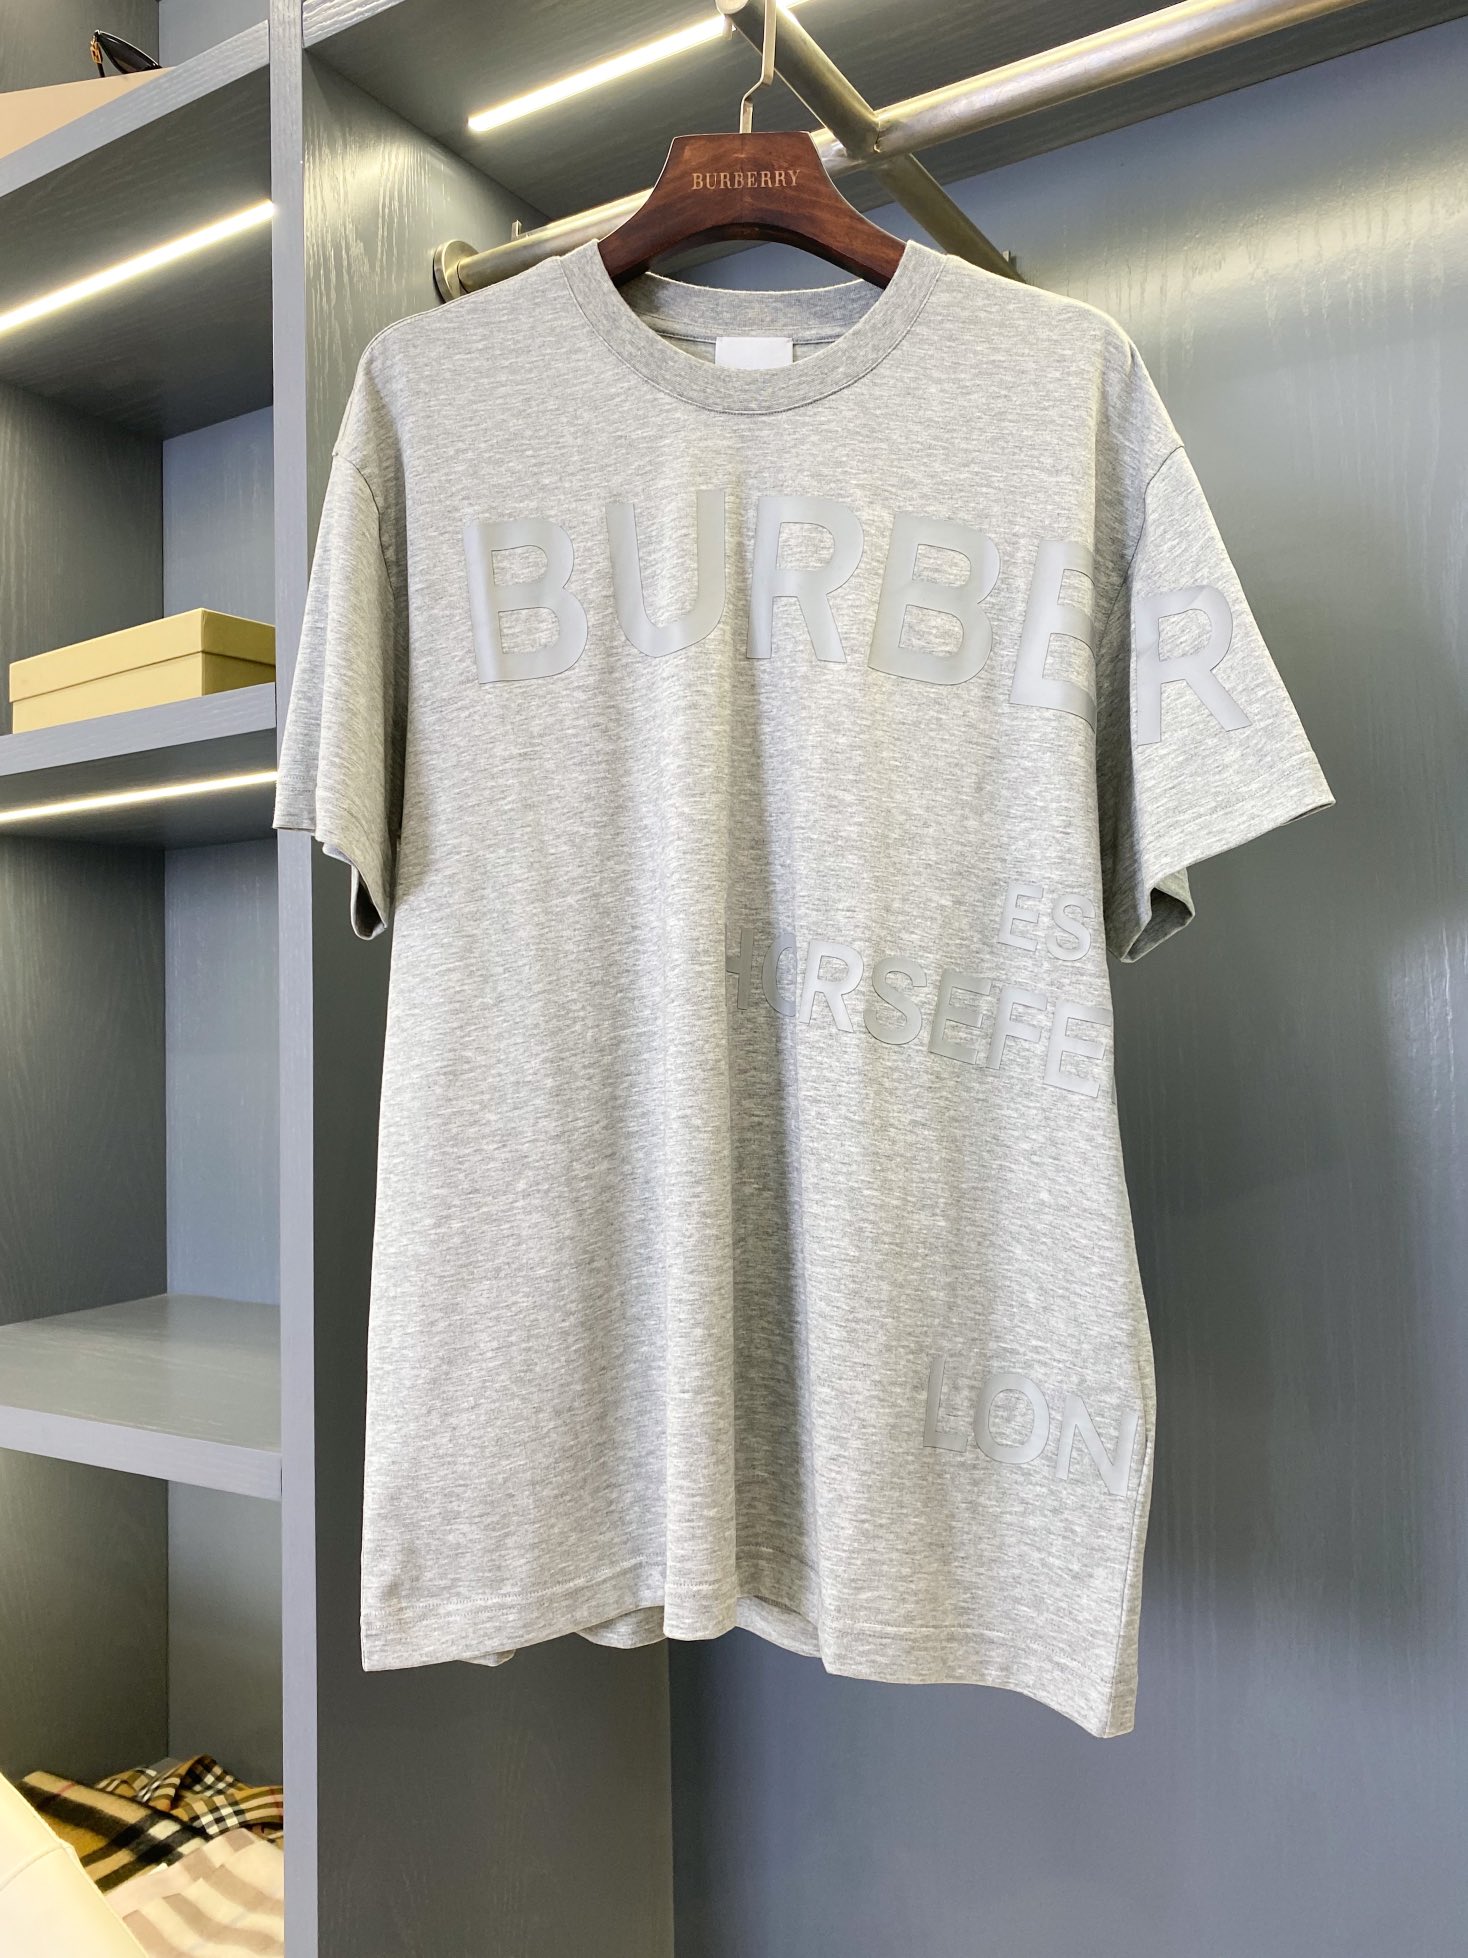 Burberry Perfect
 Clothing T-Shirt Printing Cotton Horseferry Casual